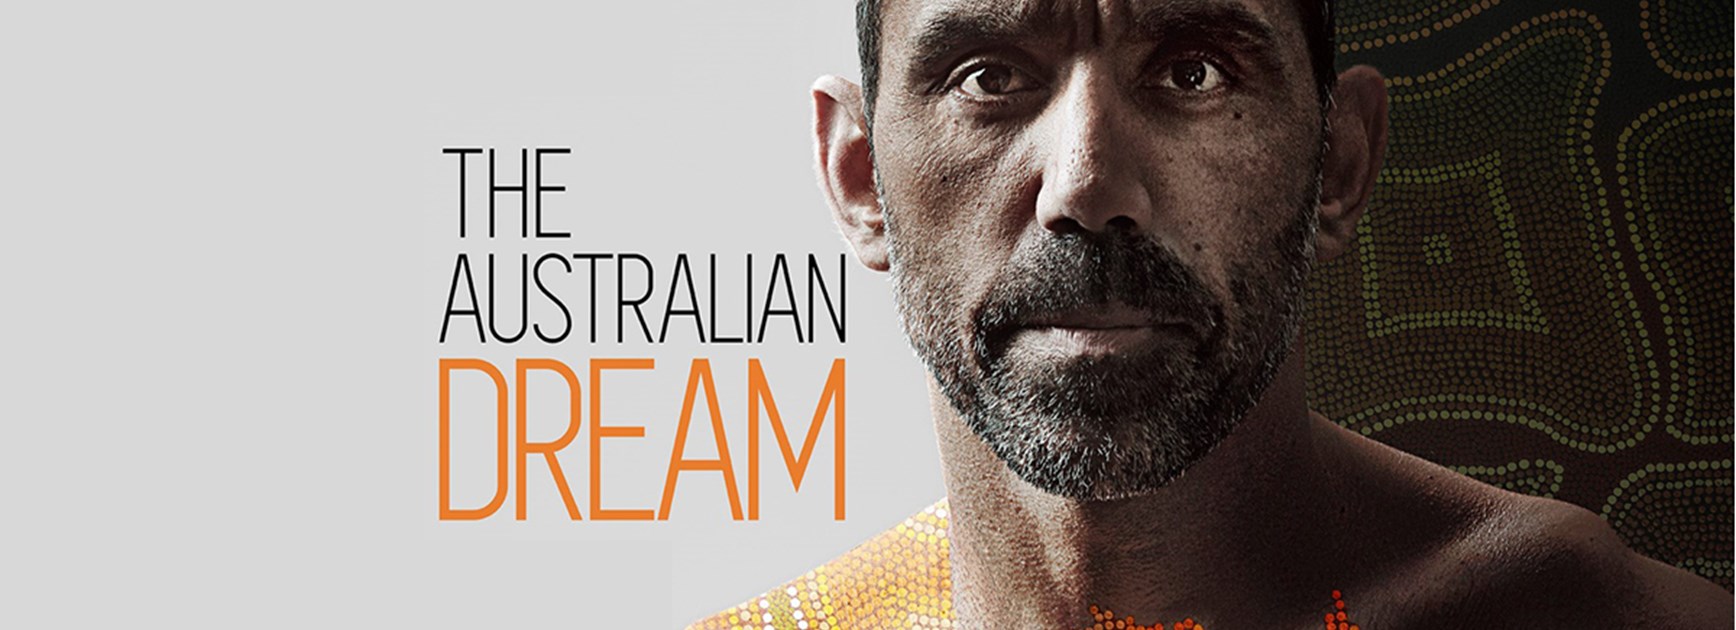 'Confronting, emotional, important' - Storm players on The Australian Dream